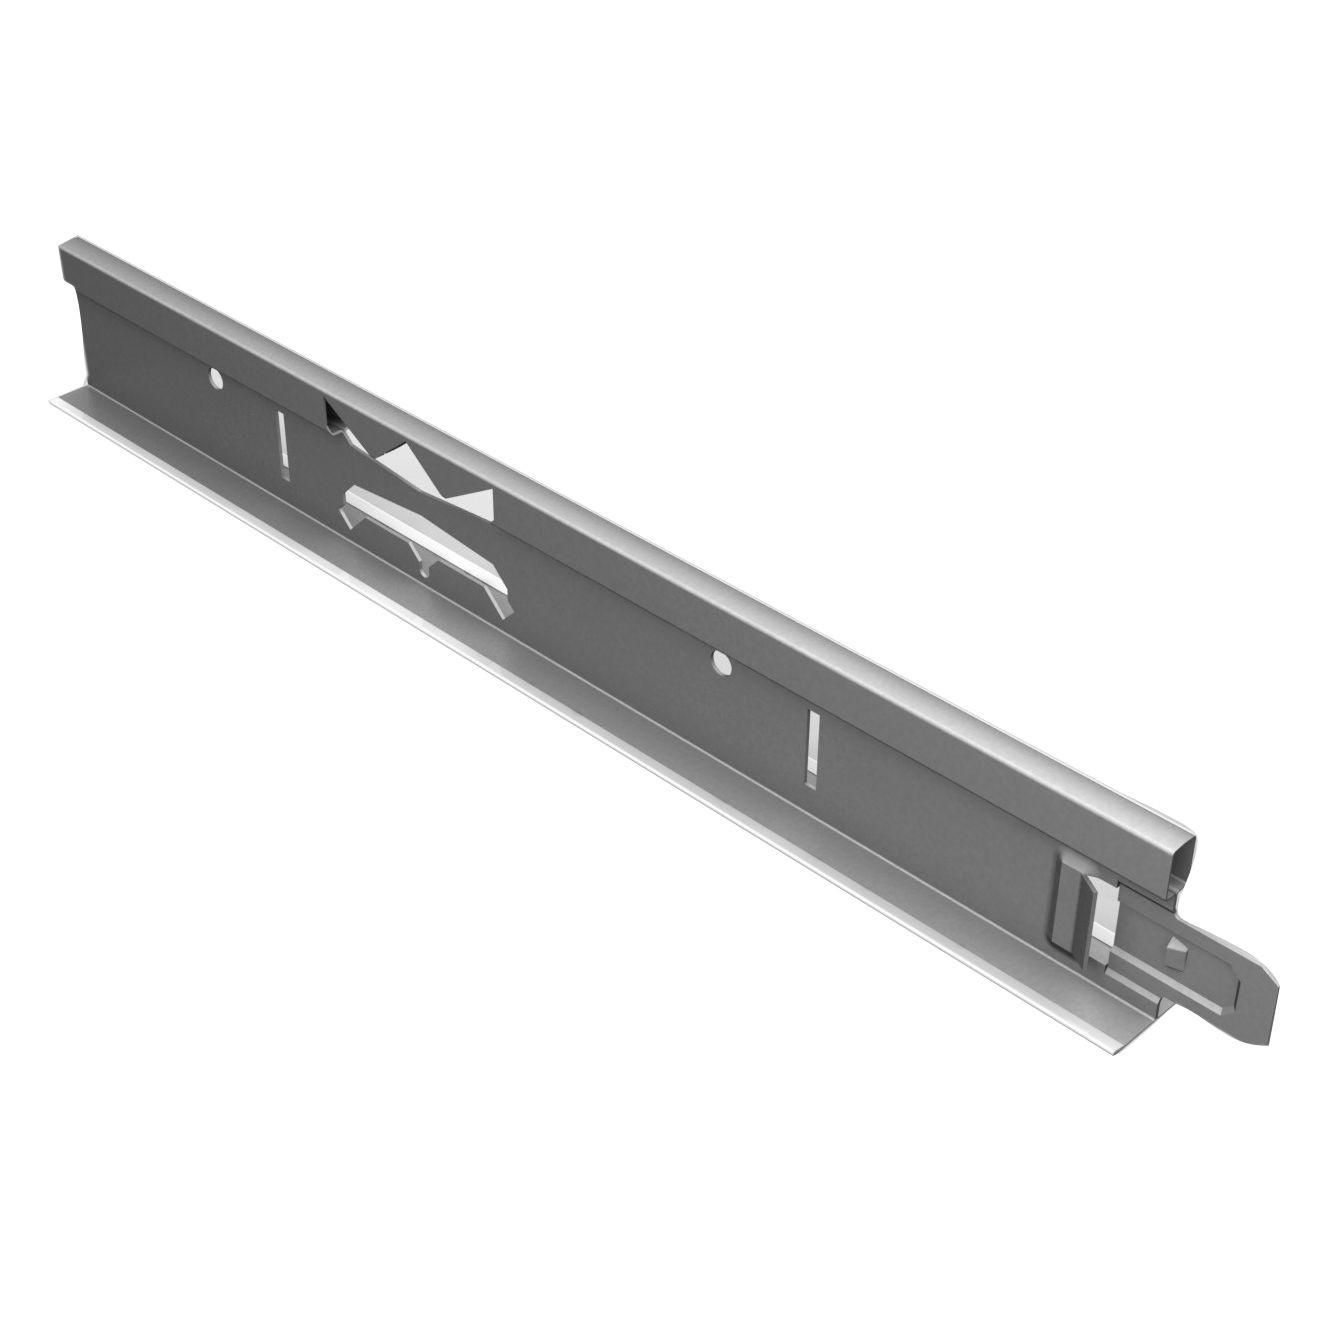 Accessories for cassette ceilings - Main profileWide-screen ceiling Rigips Quick Lock 24 x 3600 mm, maxbau.ro